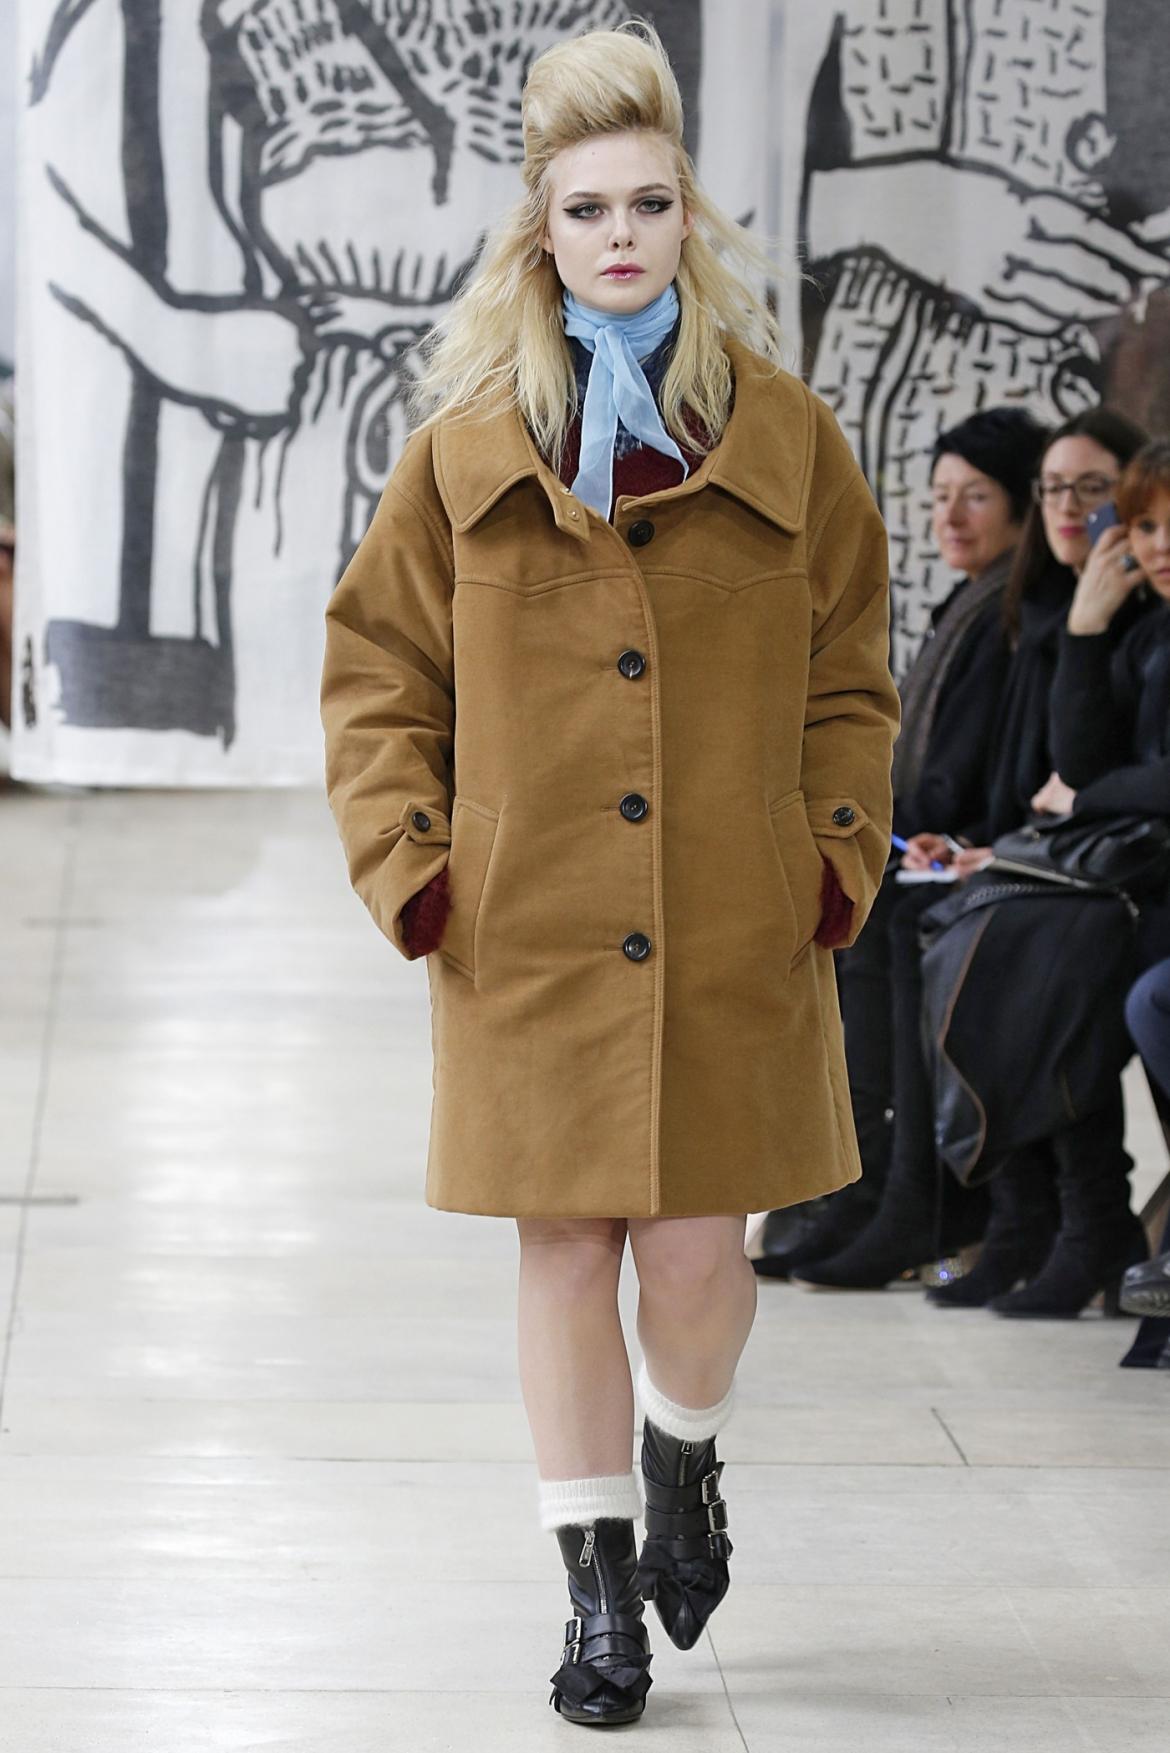 Elle Fanning Just Opened (and Closed) the Miu Miu Show